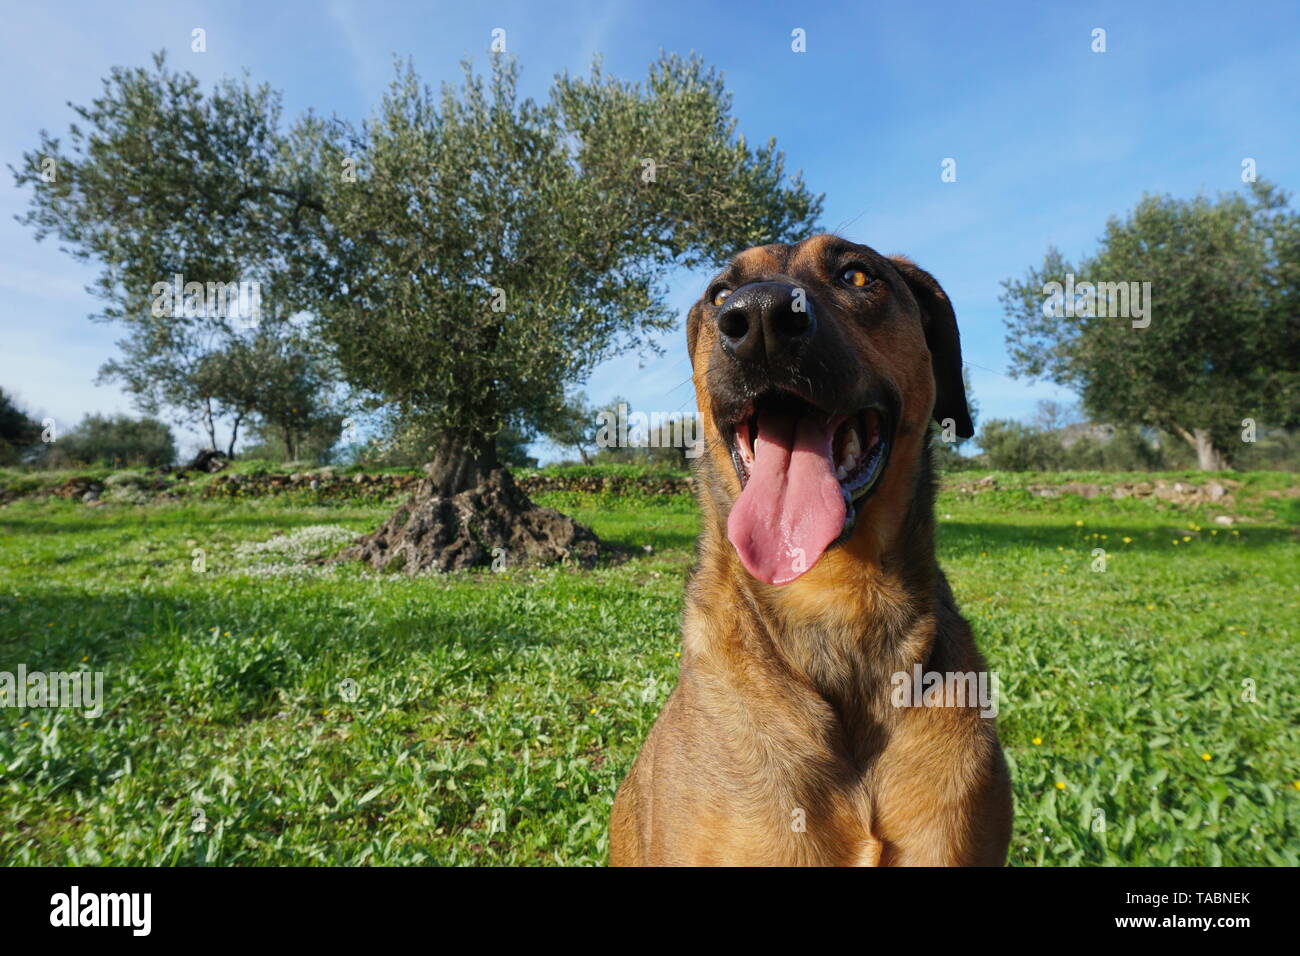 Funny face of a dog in foreground with olive tree in background, Malinois Labrador mixed-breed dog, Spain Stock Photo